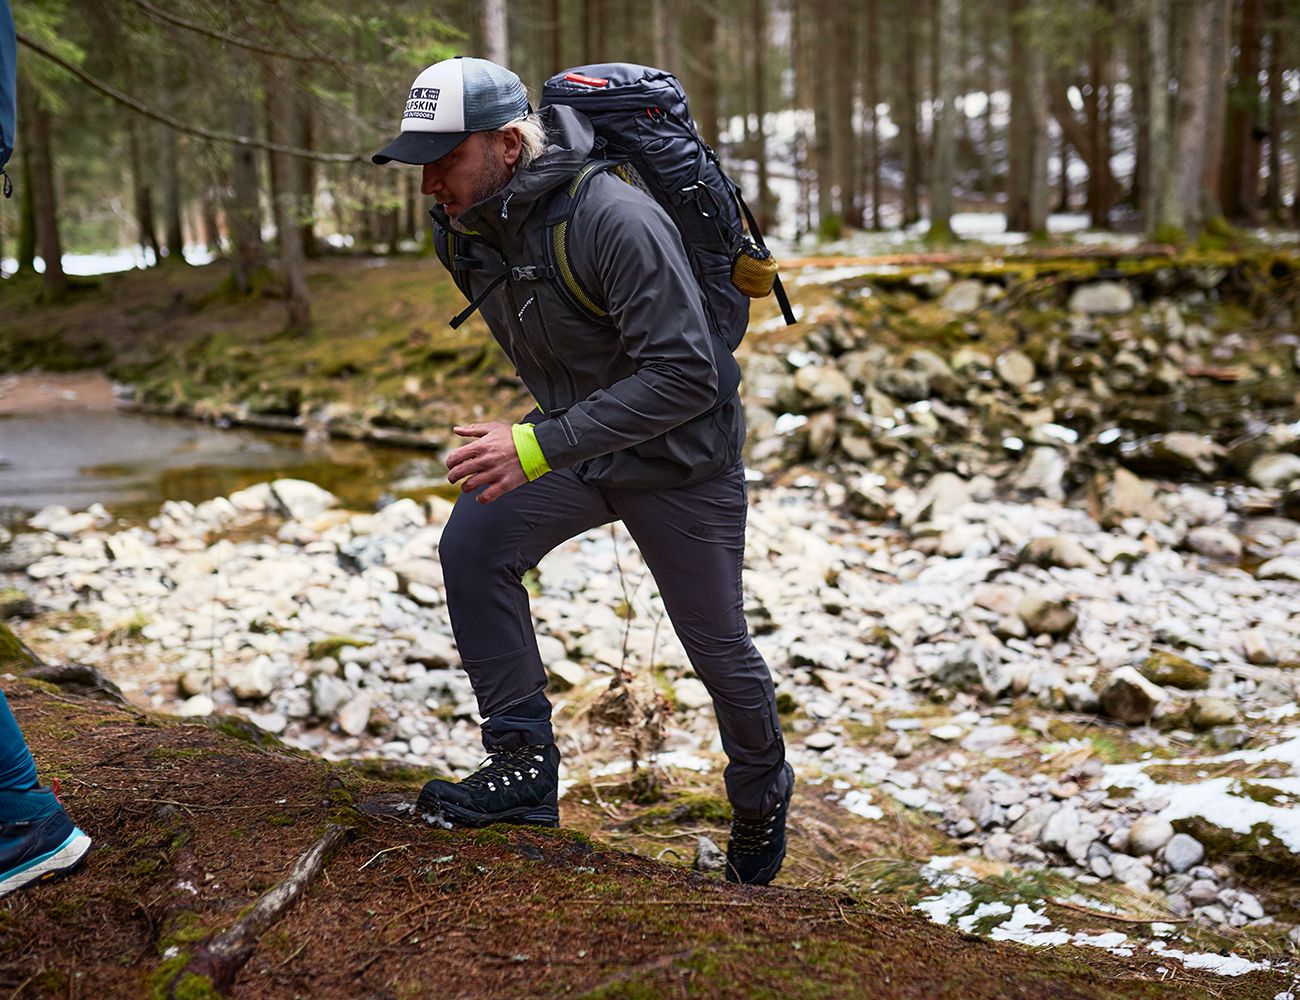 Grap transmissie zaad Jack Wolfskin Tapeless Jacket Review: Sustainable, But Not Functional